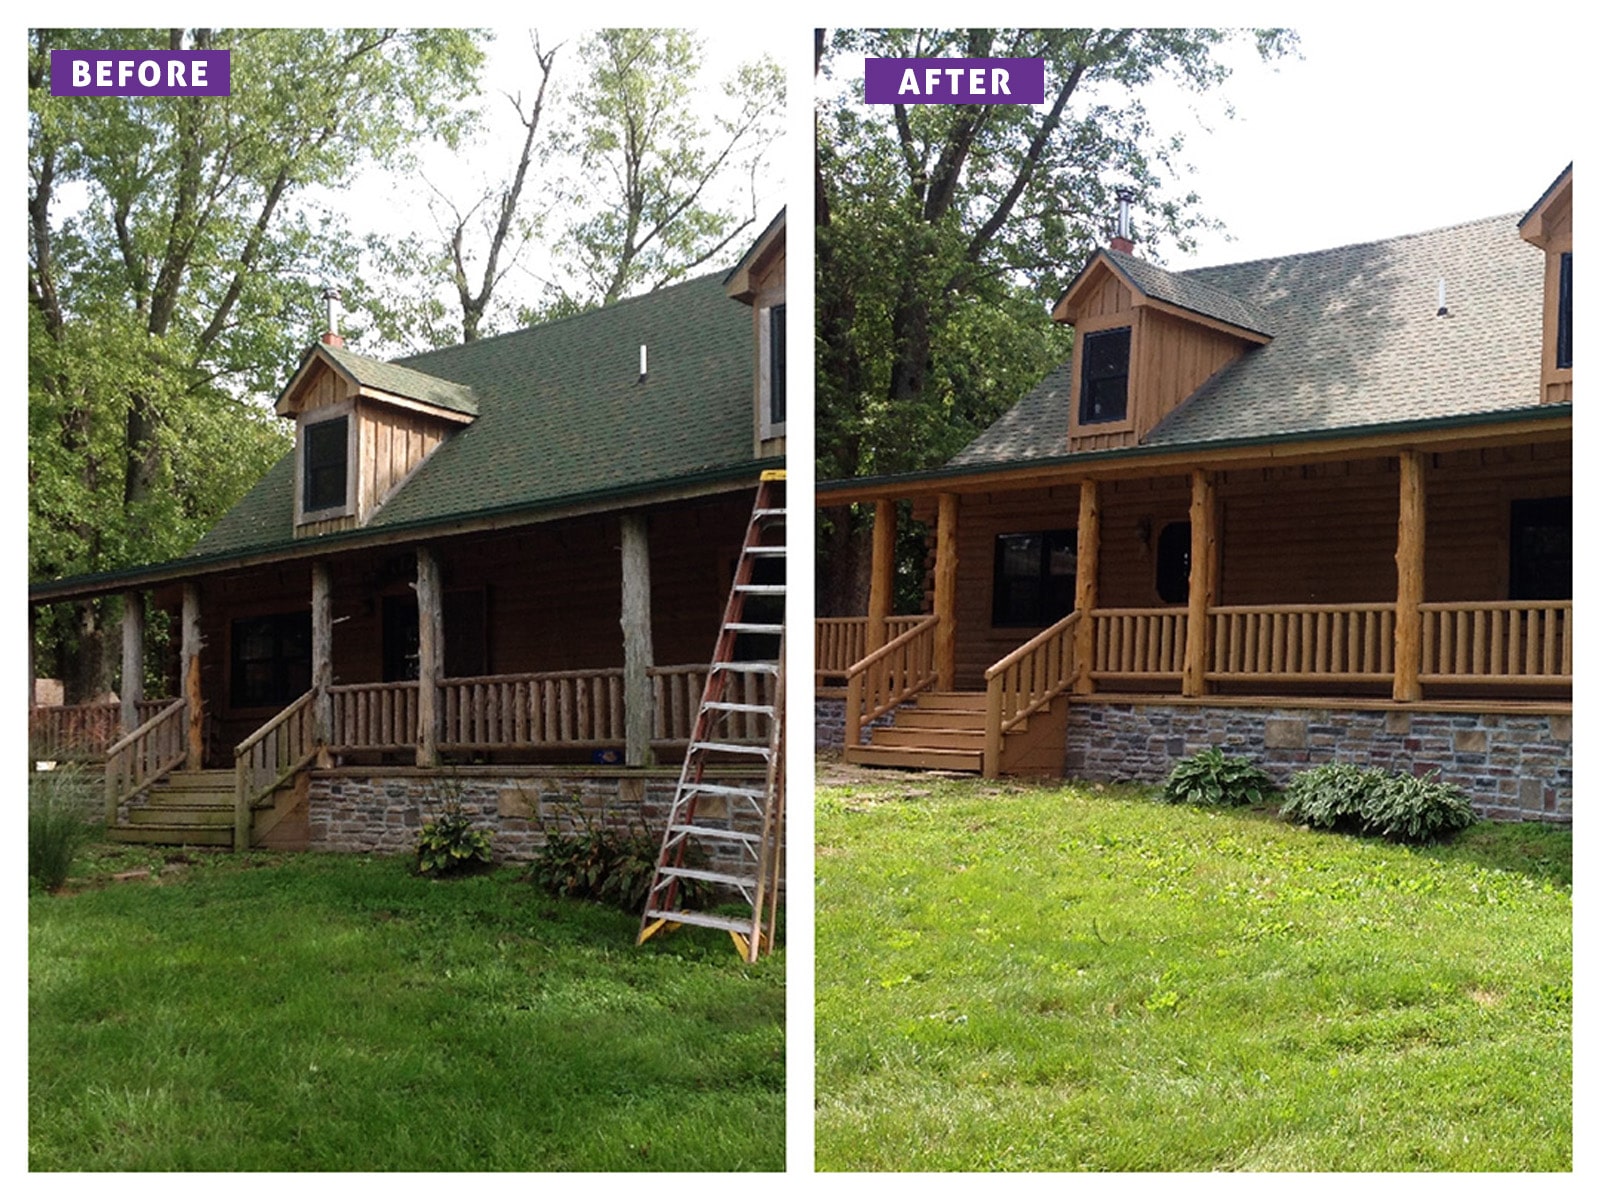 Renewed Wood House Before and After